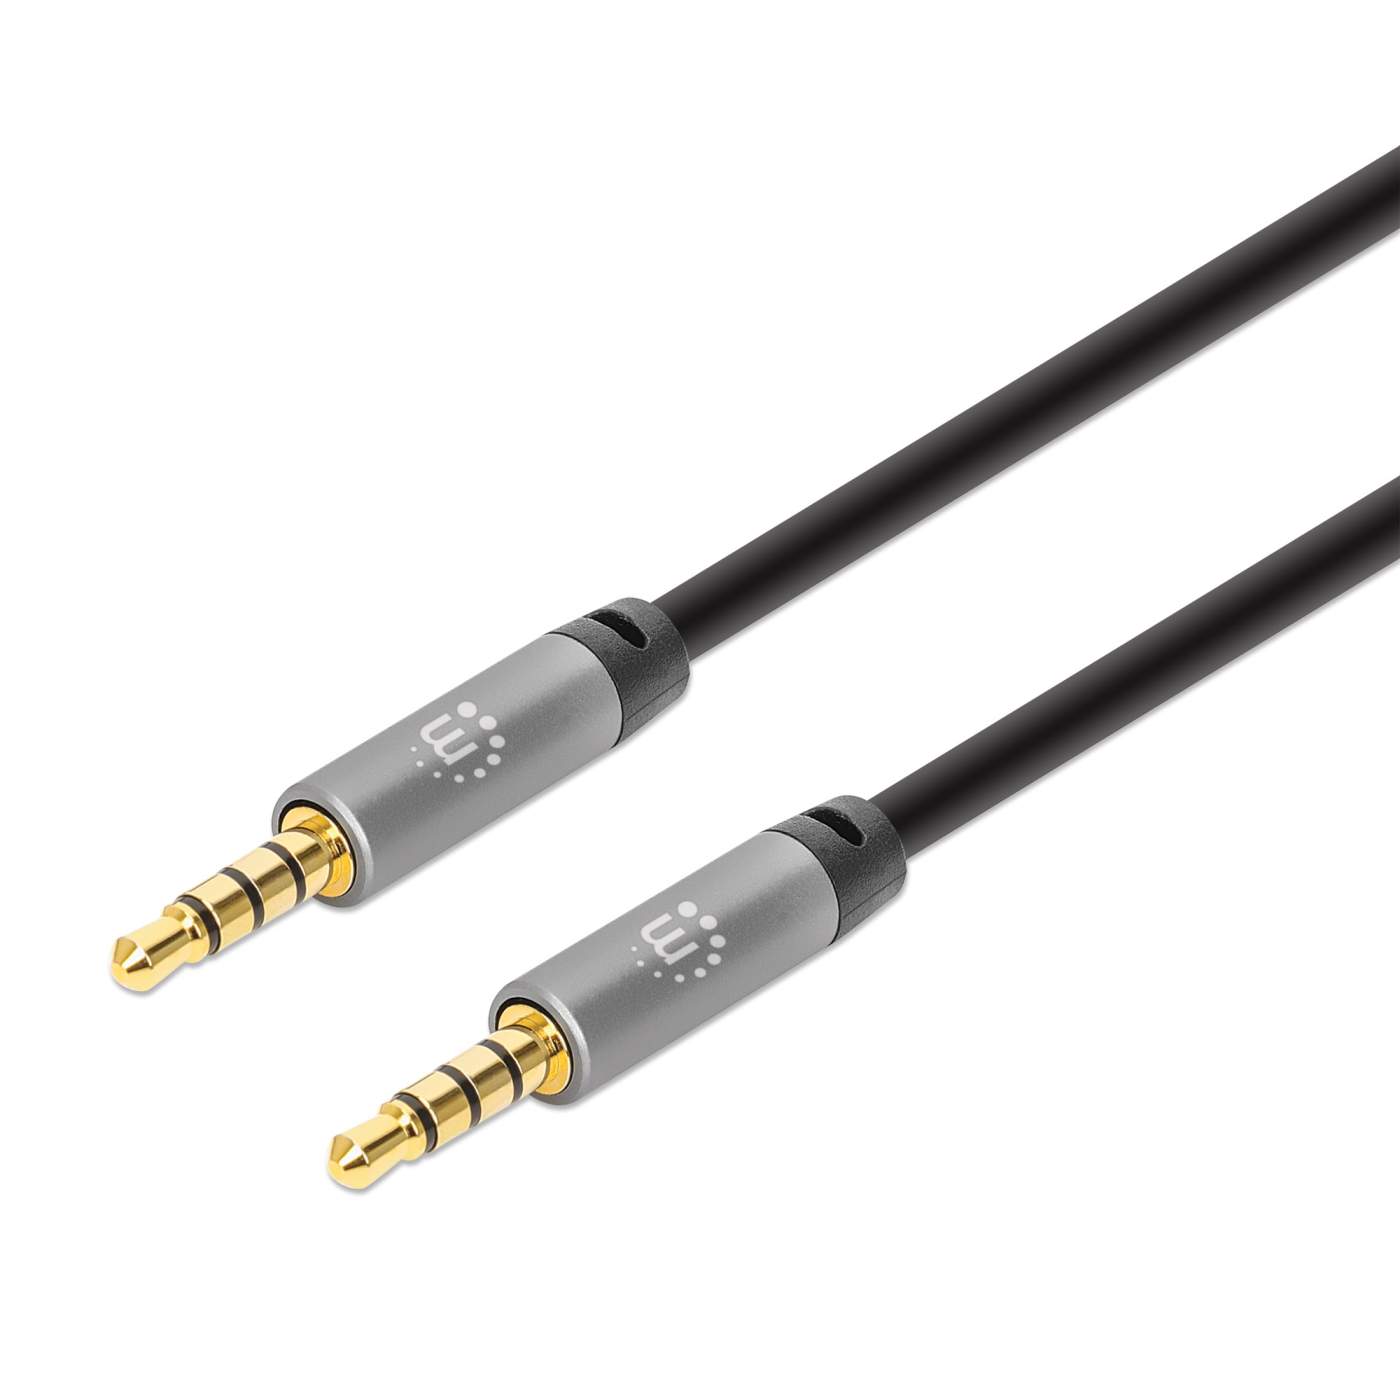 3.5mm Stereo Audio Aux Cable Male to Male